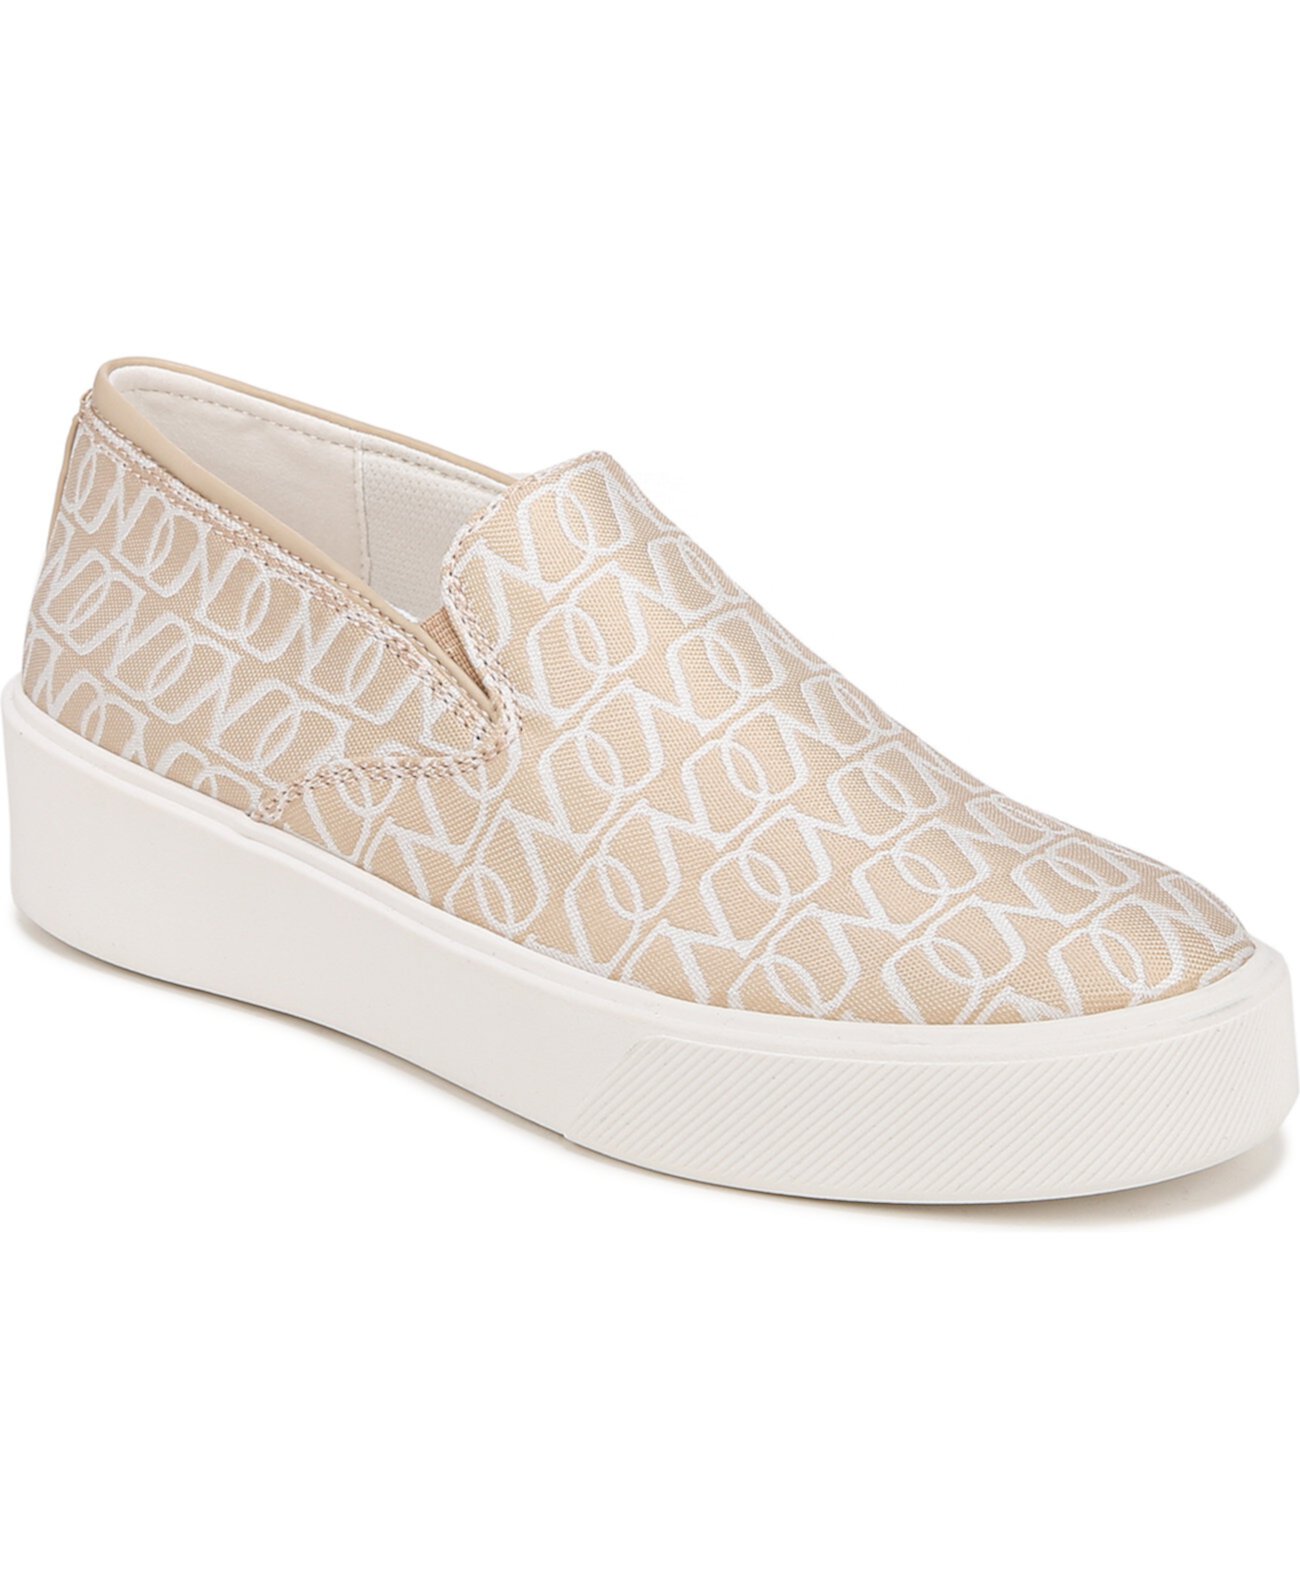 Marianne 3.0 Slip-on Sneakers Naturalizer